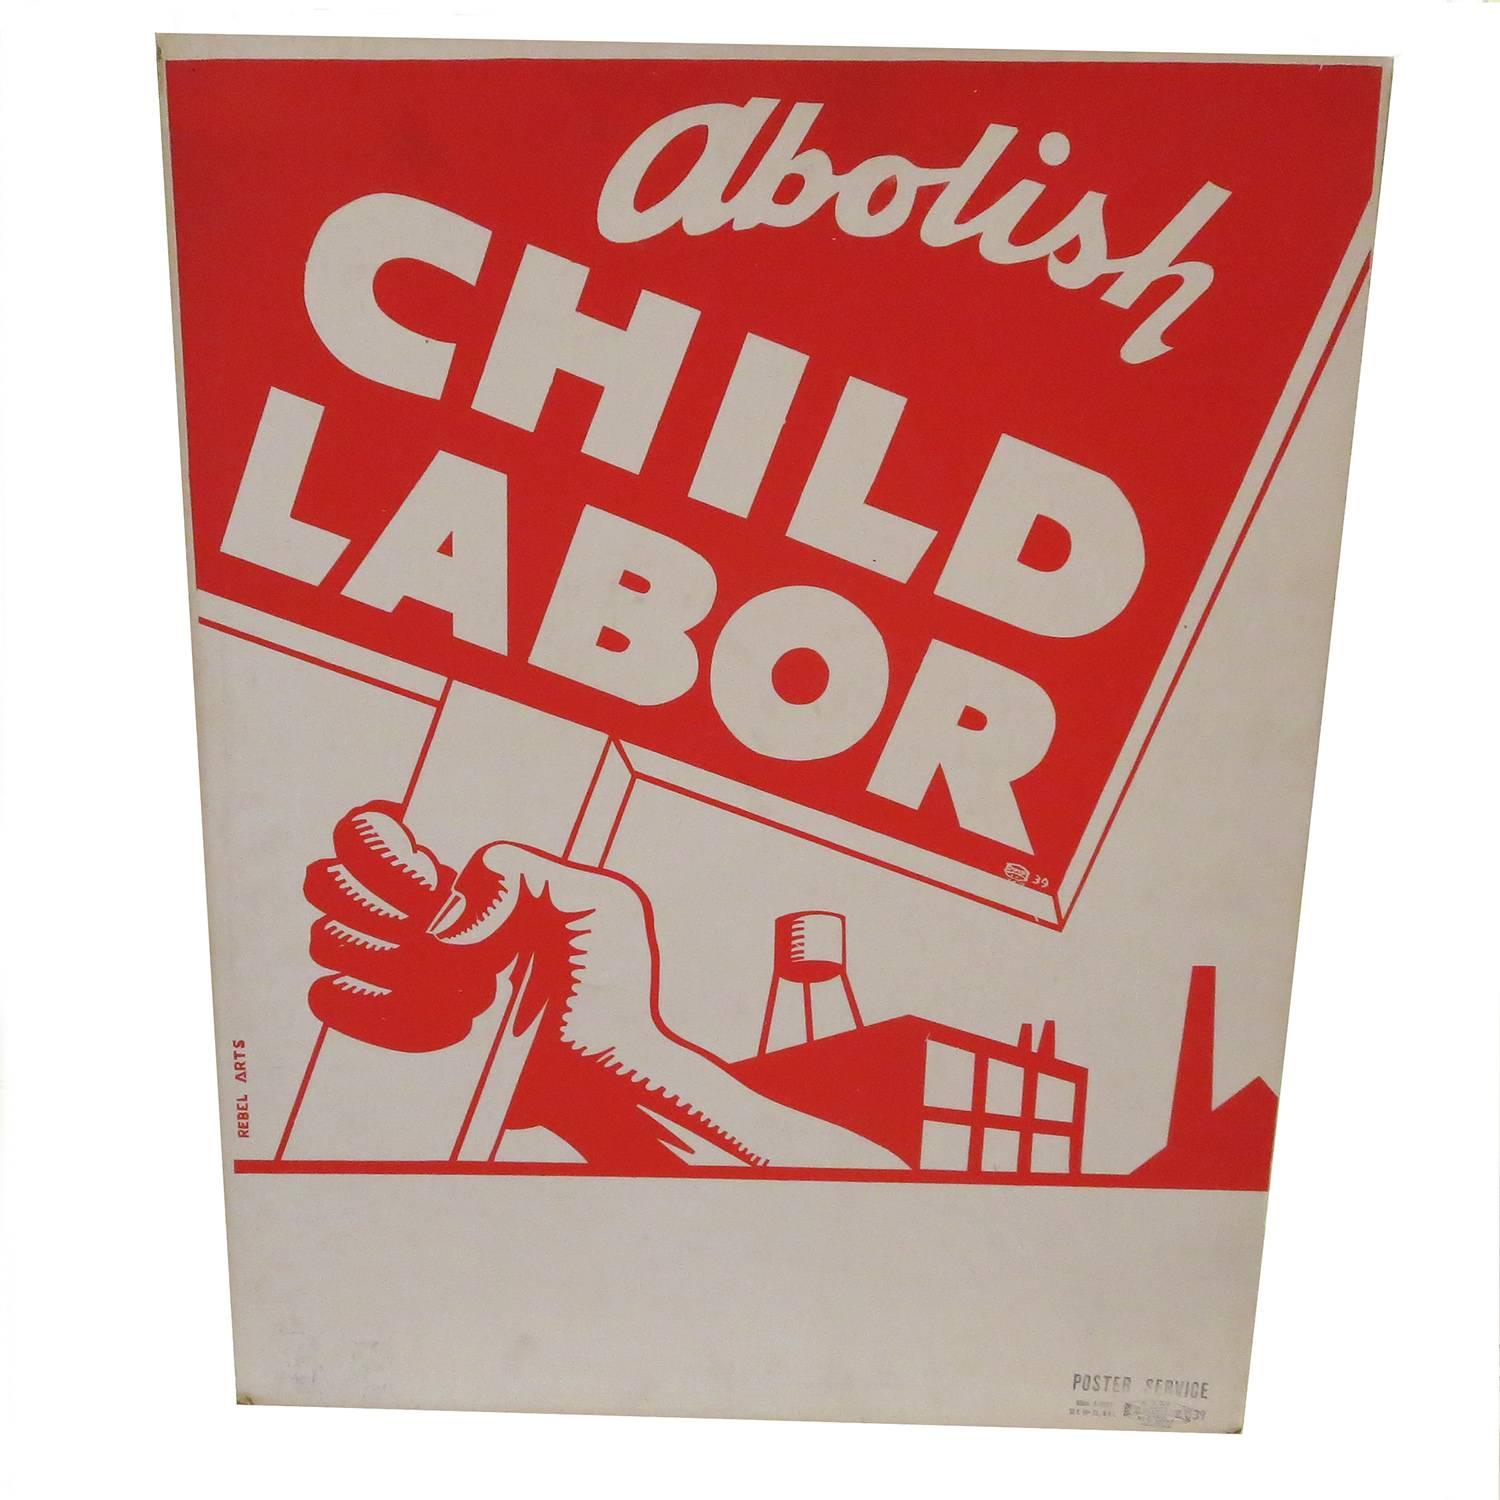 1939 Socialist Child Labor Poster by Rebel Arts Group, New York